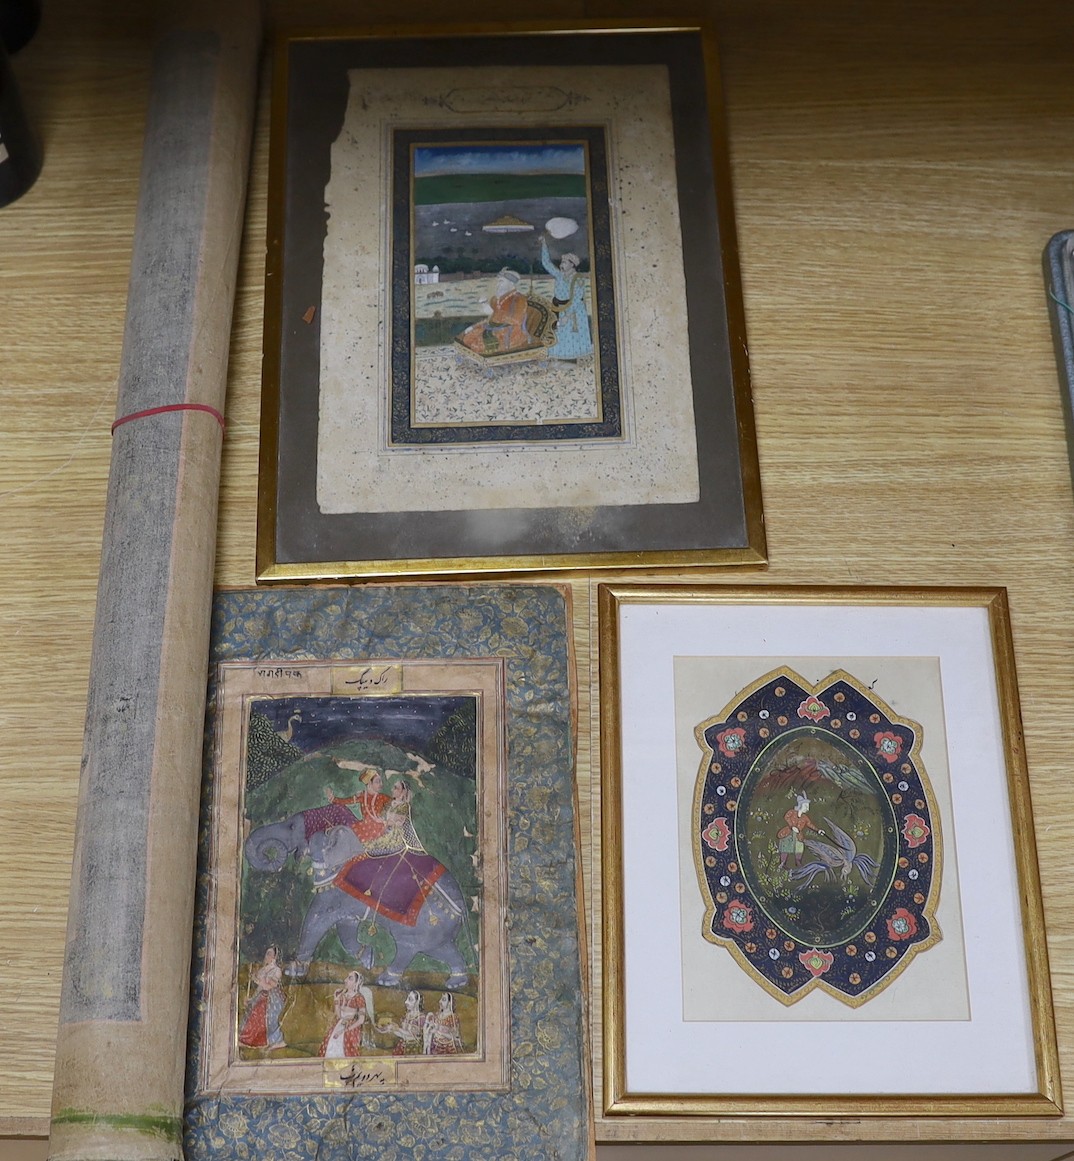 An Indian painted silk panel, two framed Persian paintings and another unframed painting.